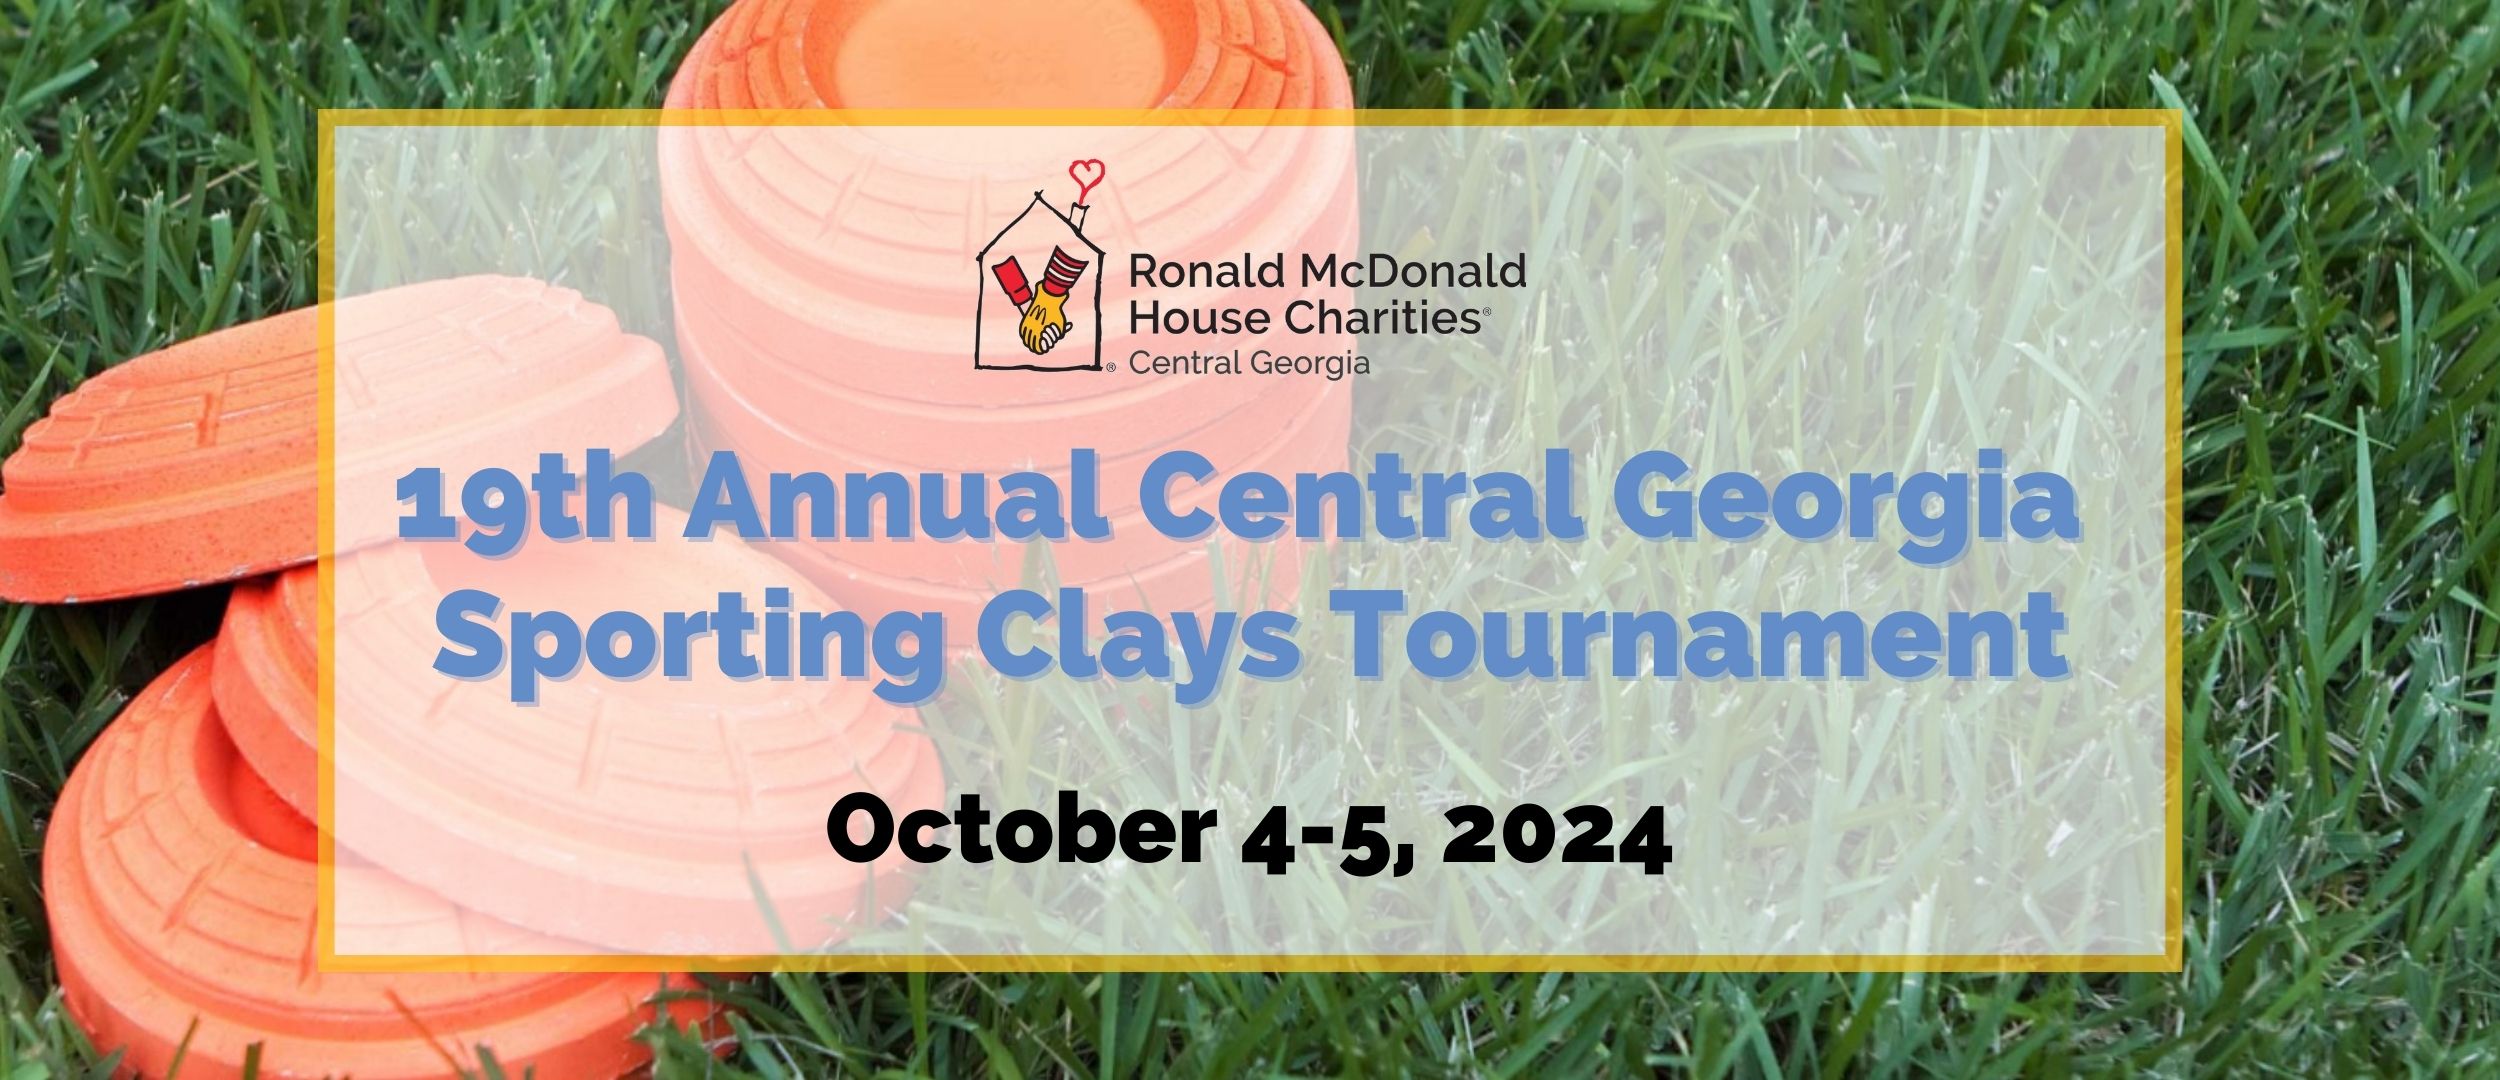 Save the Date! 2022 Sporting Clays